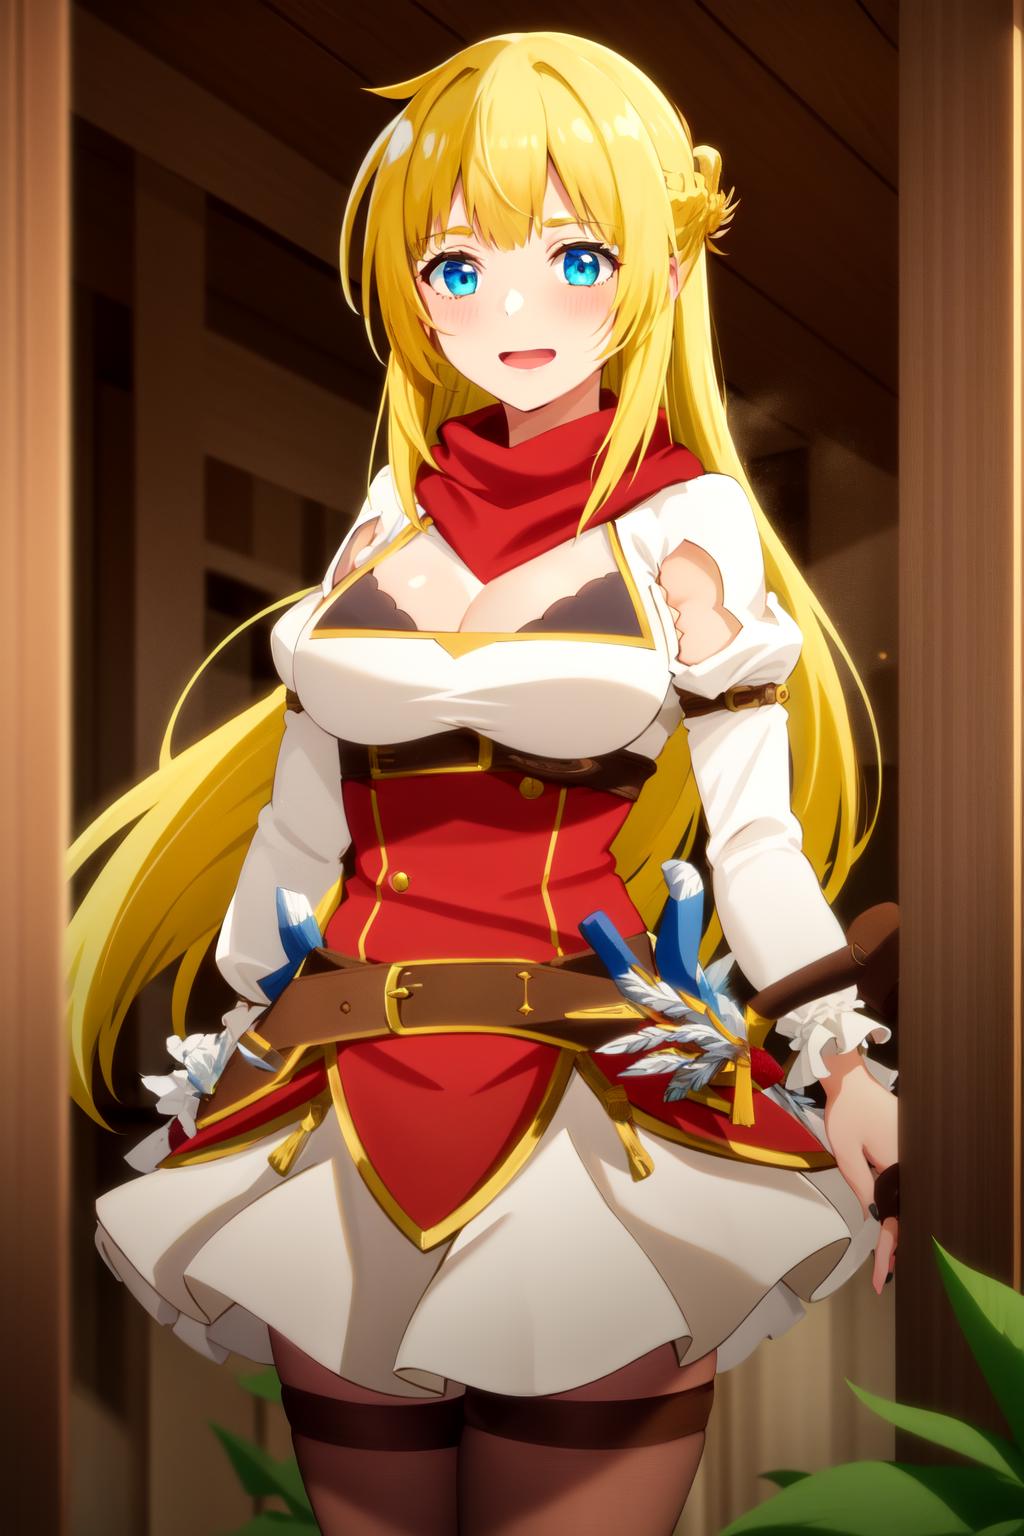 Banished From Hero's Party Episode 12 Preview Released Banished From Hero's  Party anime has released the preview images and teaser trailer for episode  12. The anime will resume on December 22, 2021,